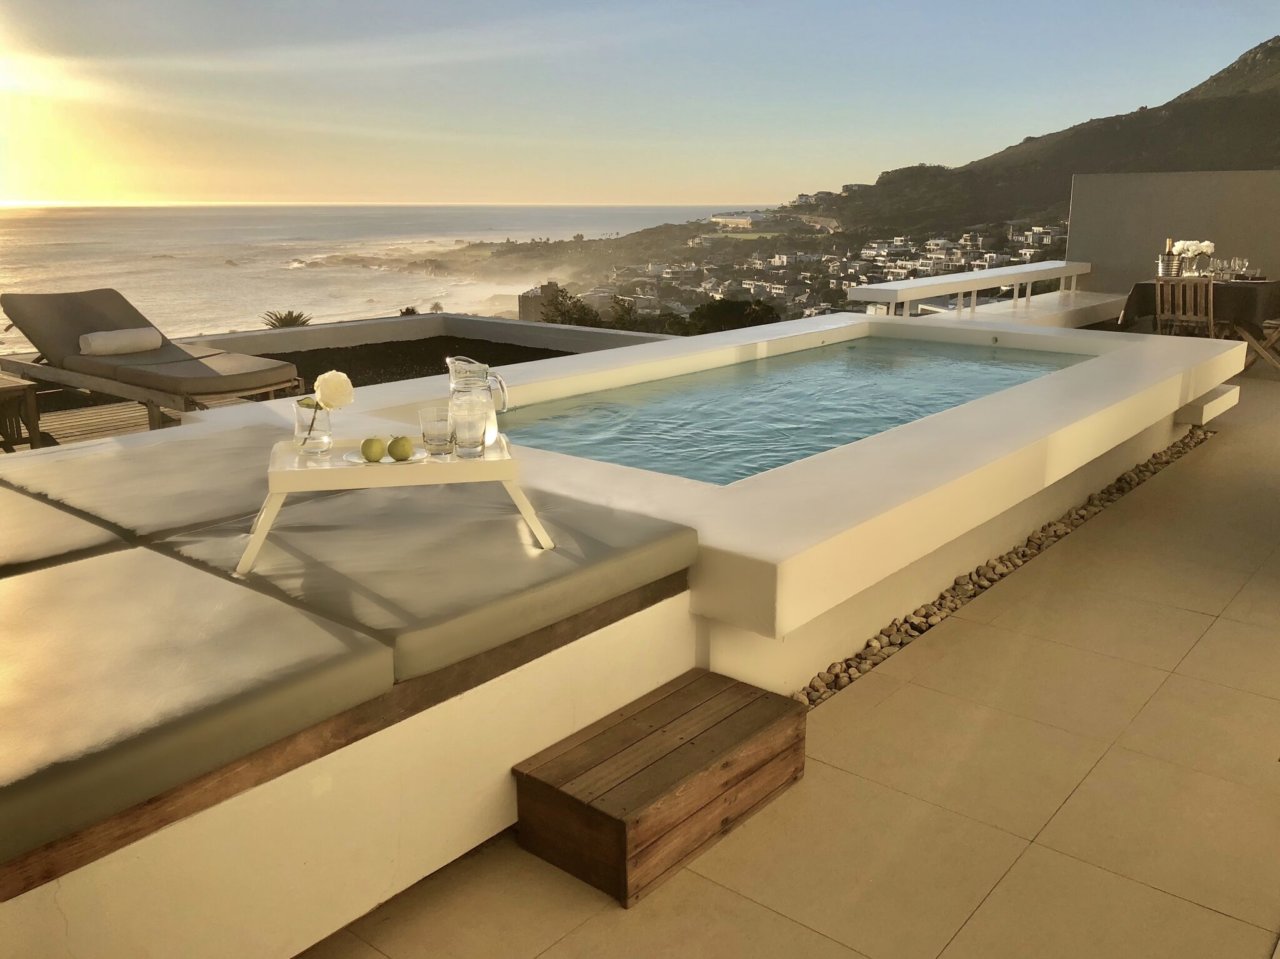 Photo 14 of Aqua Penthouse accommodation in Camps Bay, Cape Town with 2 bedrooms and 2 bathrooms